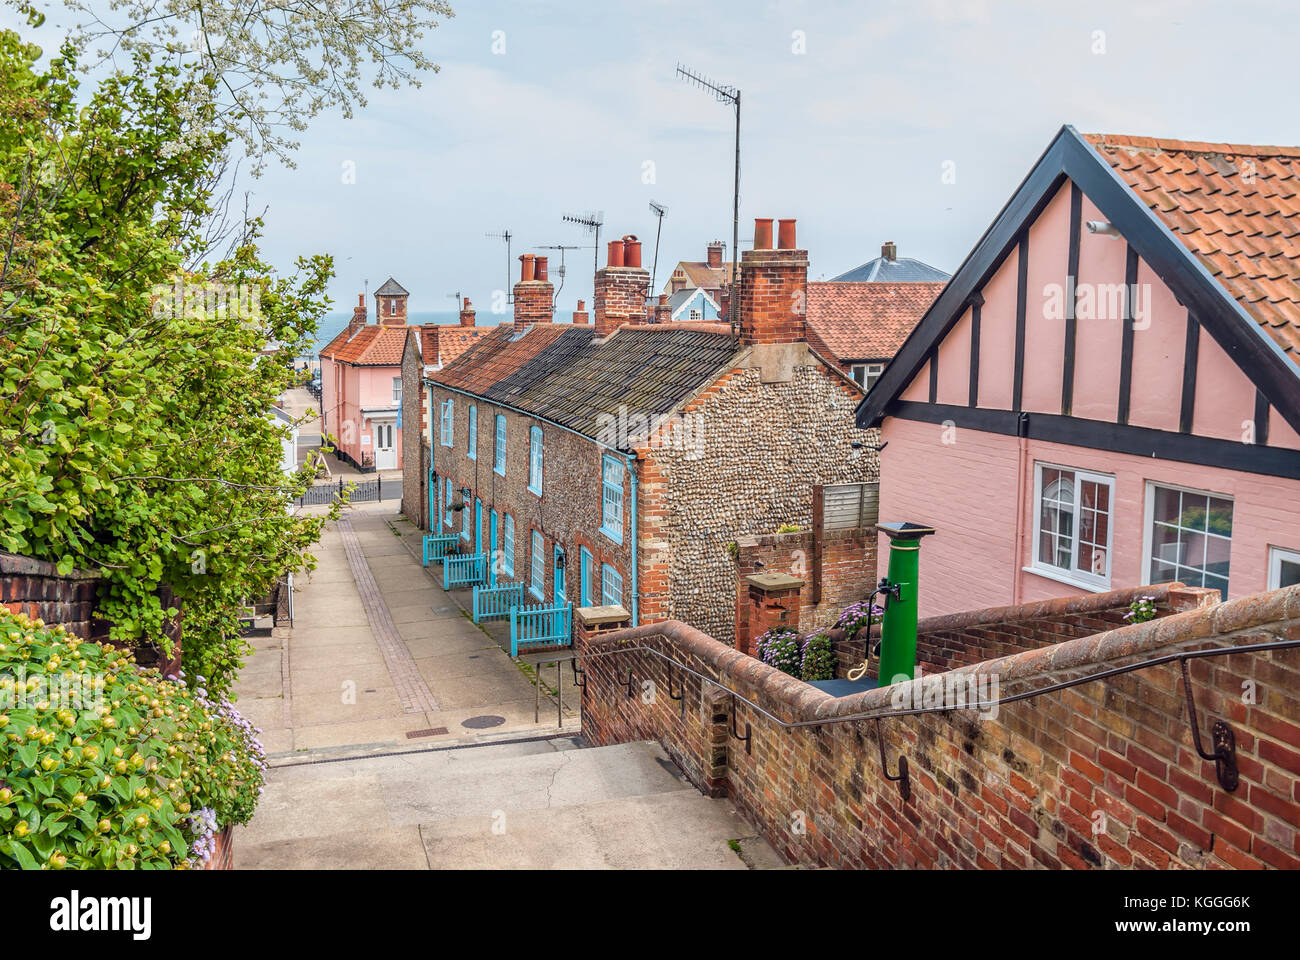 Waterfront of Aldeburgh, a coastal town in Suffolk, East Anglia, England Stock Photo